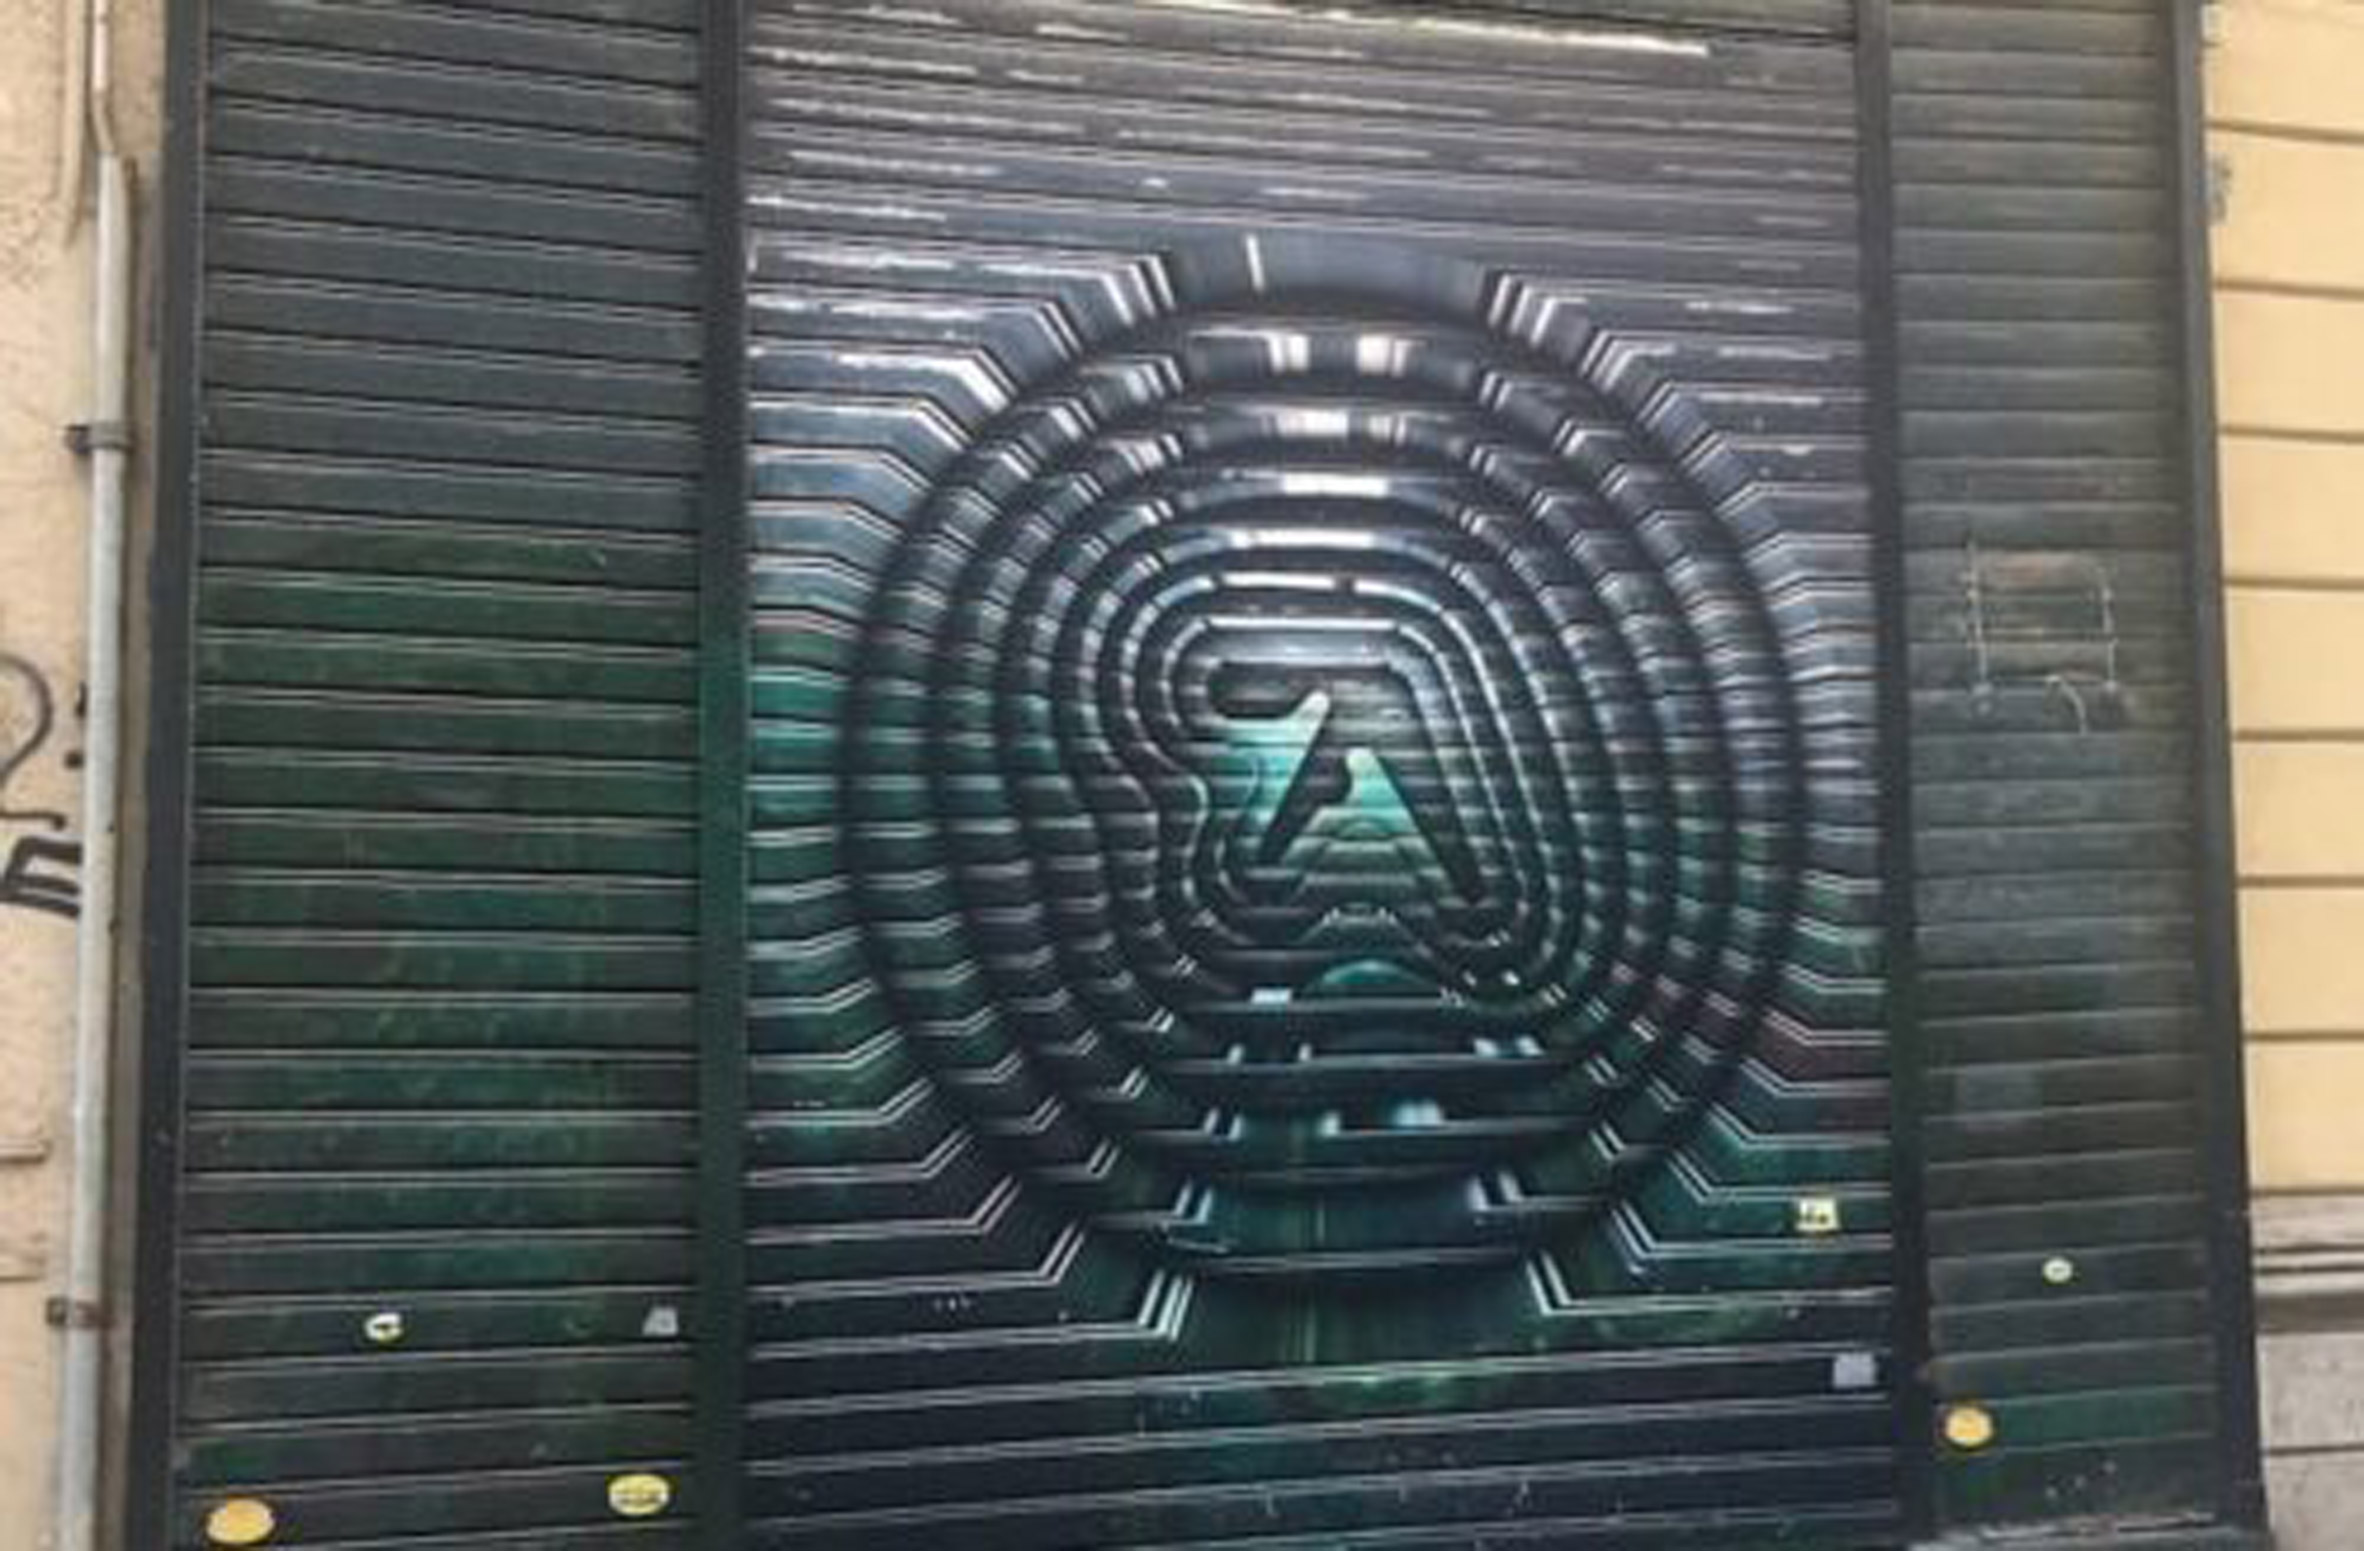 Mysterious Aphex Twin logos appear in destinations across the world